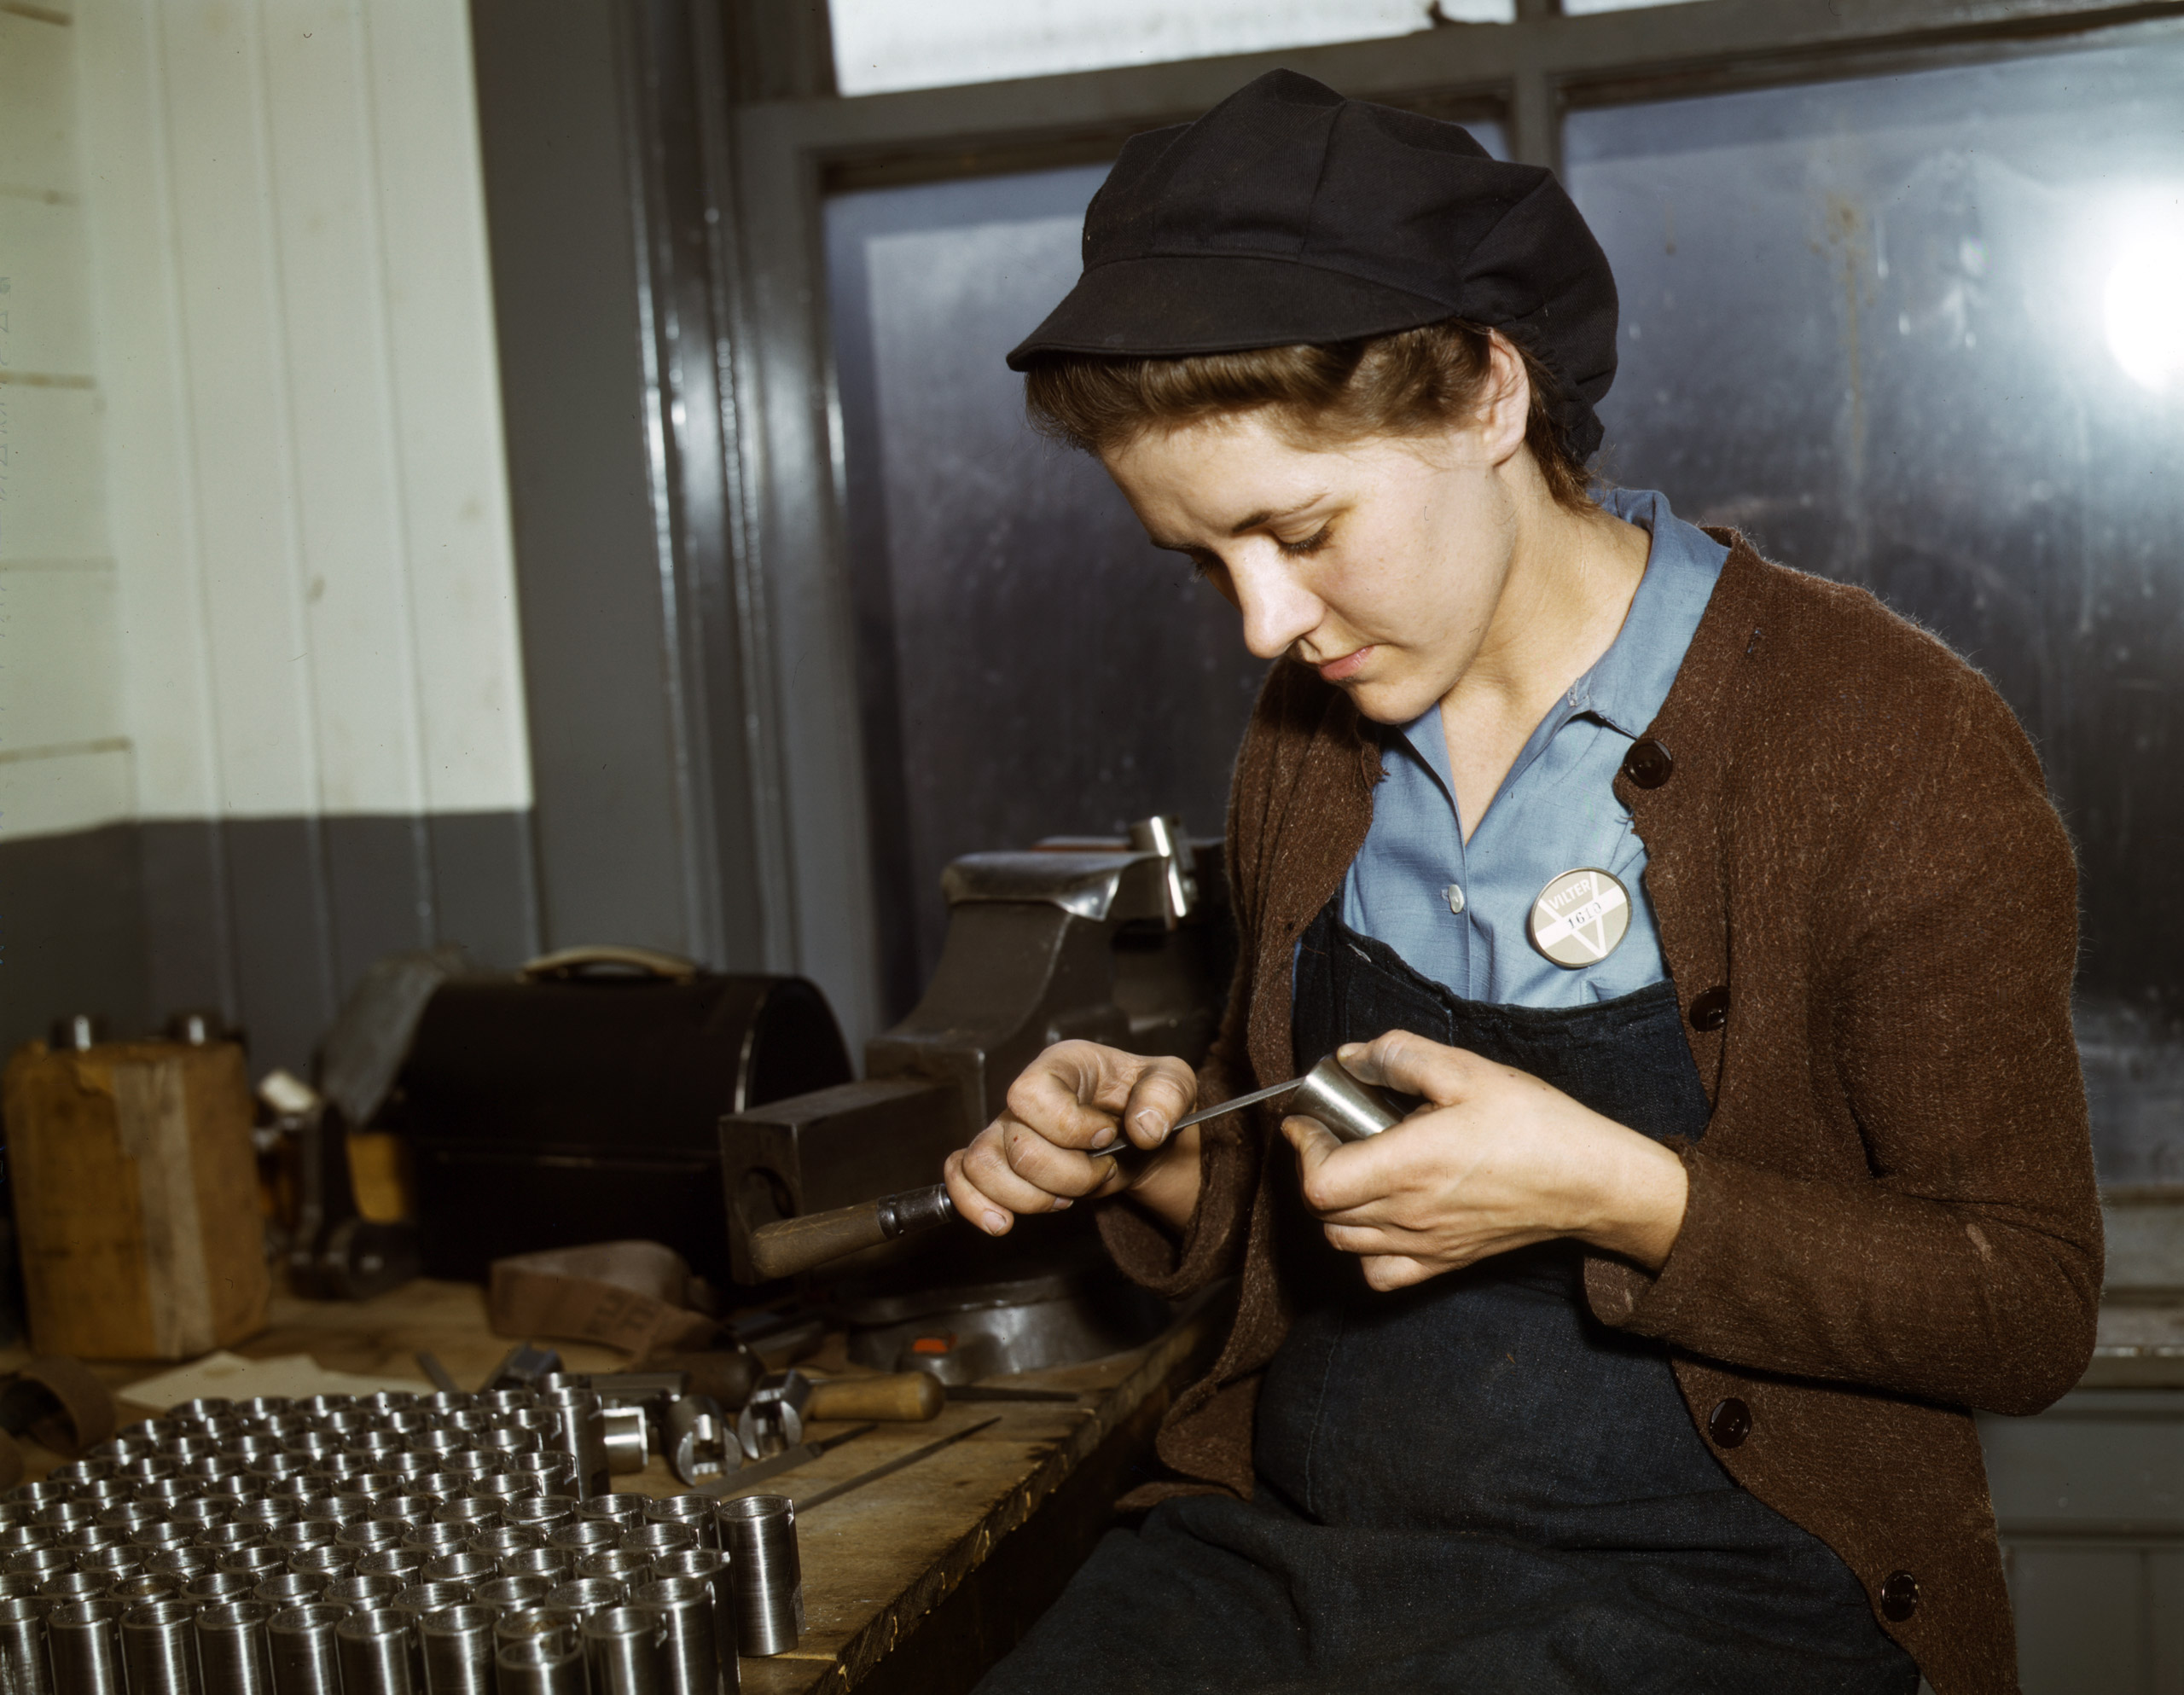 War production workers at the Vilter [Manufacturing] Company making M5 and M7 guns for the U.S. Army, Milwaukee, Wis. Ex-housewife, age 24, filing small parts. Her husband and brother are in the armed service. February 1943. Photographed by Howard R. Hollem for the Farm Security Administration.